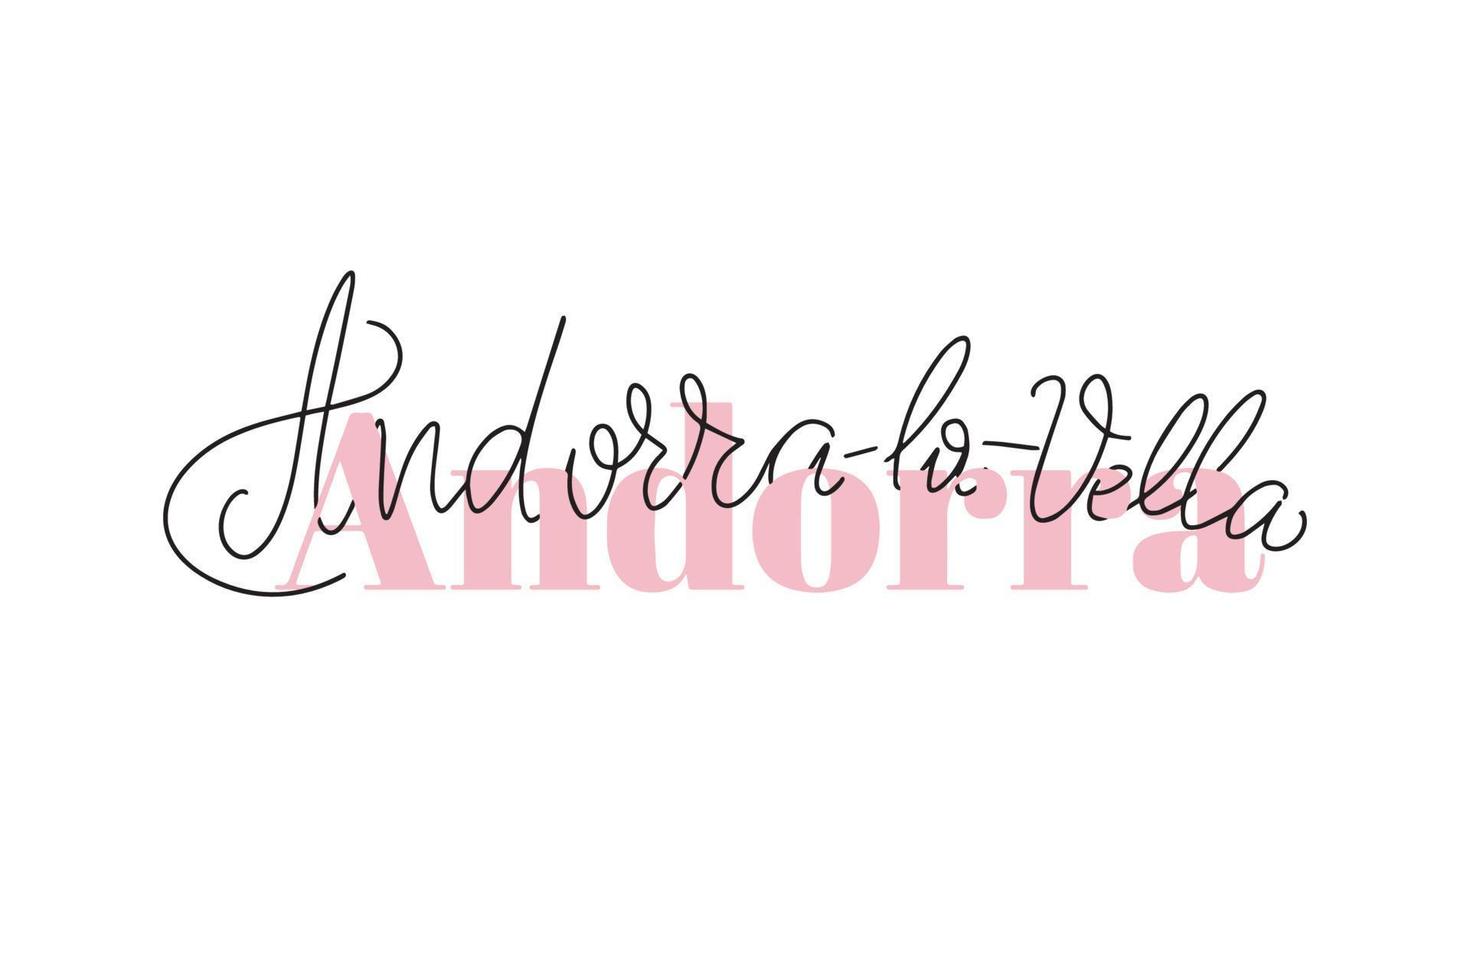 Inspirational handwritten brush lettering Andorra - Andorra-la-Vella. Vector calligraphy illustration isolated on white background. Typography for banners, badges, postcard, tshirt, prints, posters.